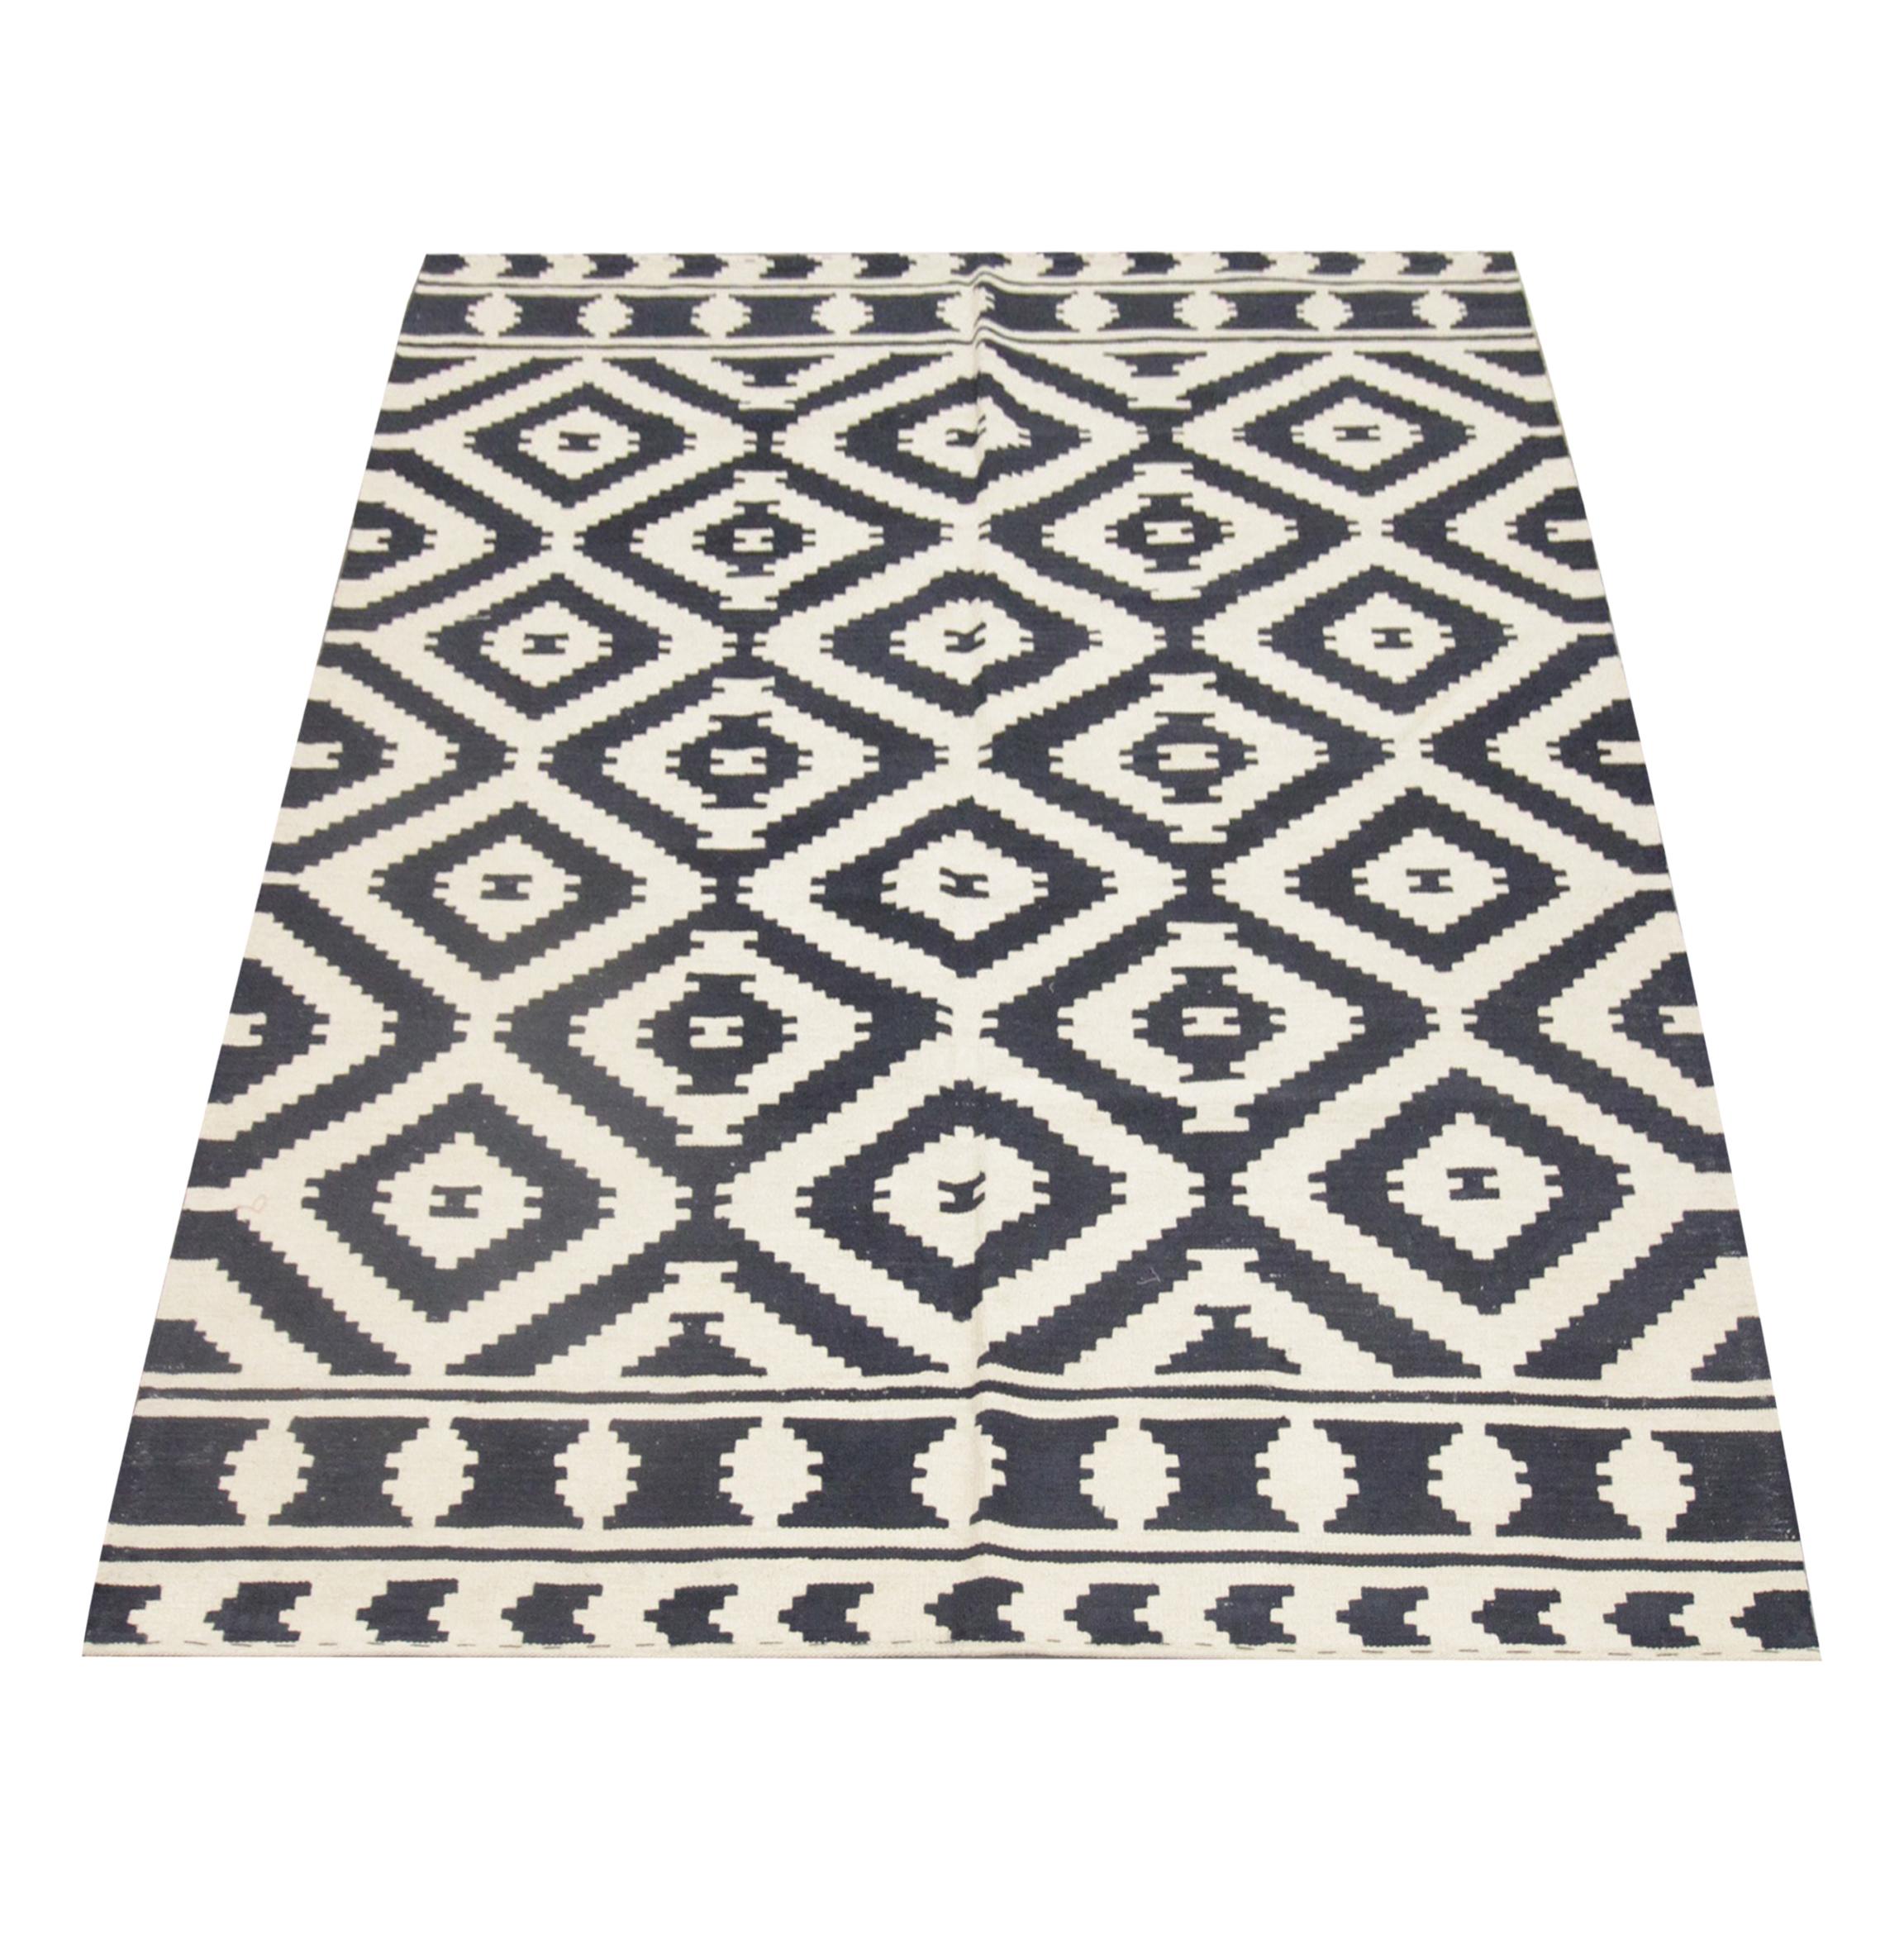 This modern wool rug is a handwoven Kilim constructed in Afghanistan in the early 2000s. The design has been woven with a simple, contrasting colour palette featuring black and cream. The design is a repeating pattern with diamond motifs woven